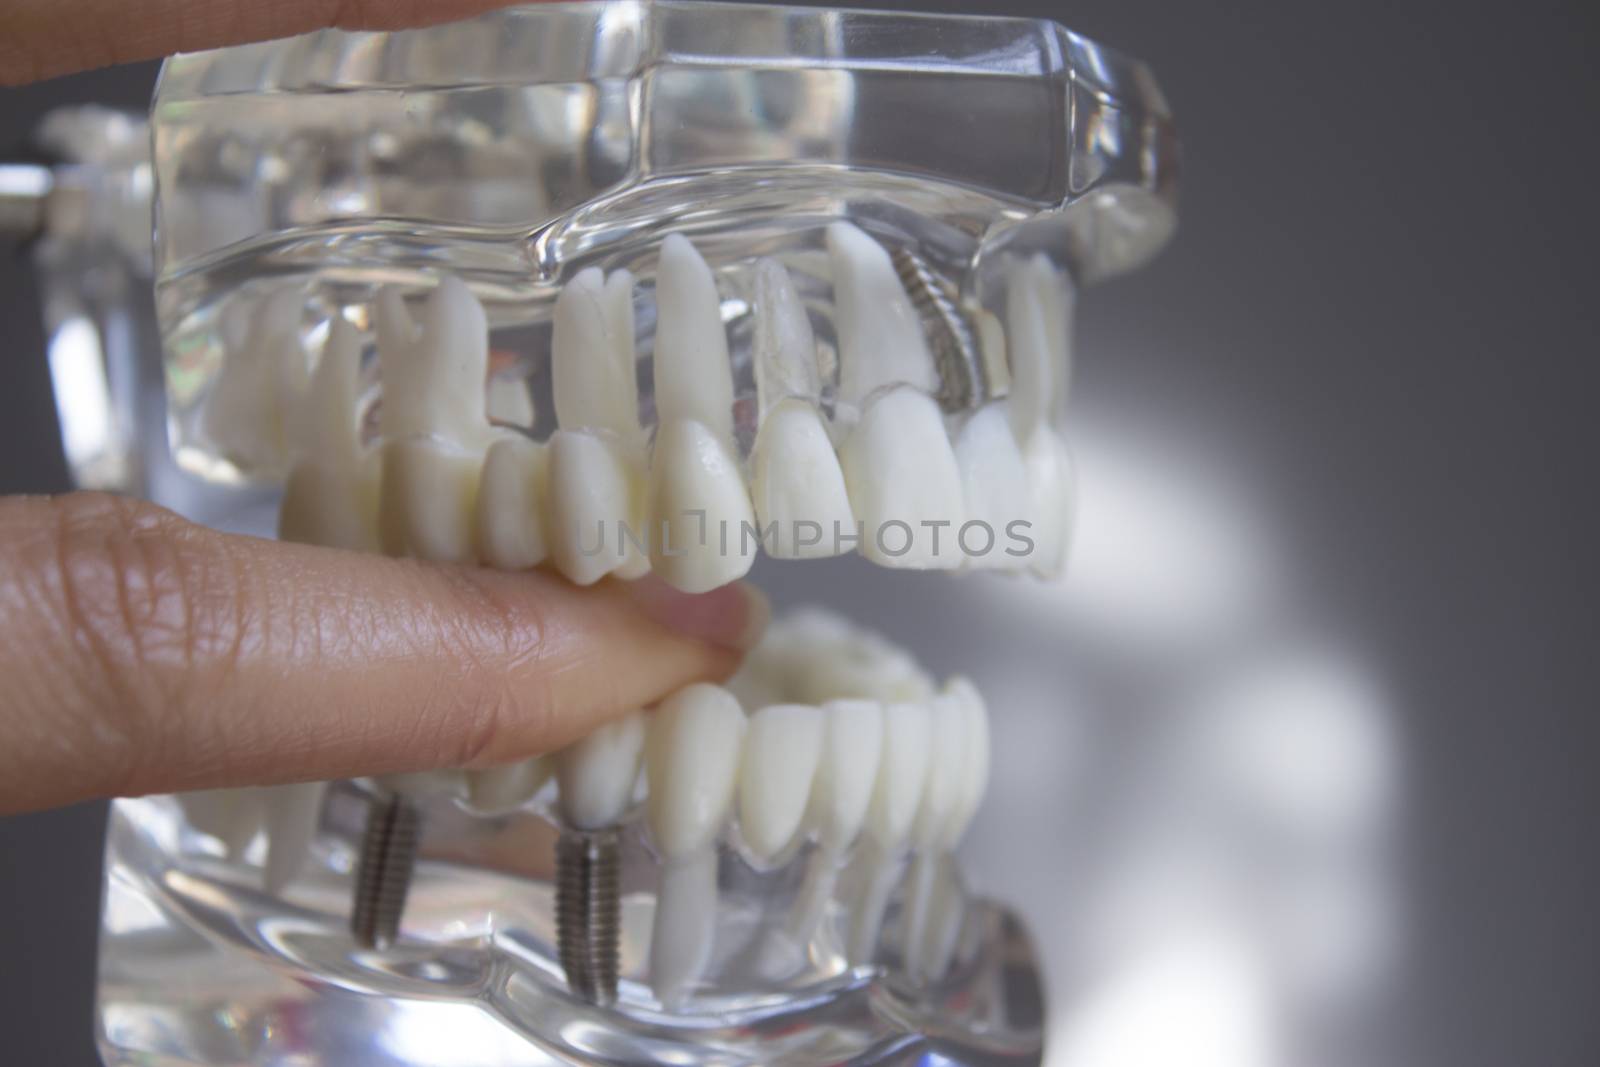 False teeth gripped by the hand of a woman
